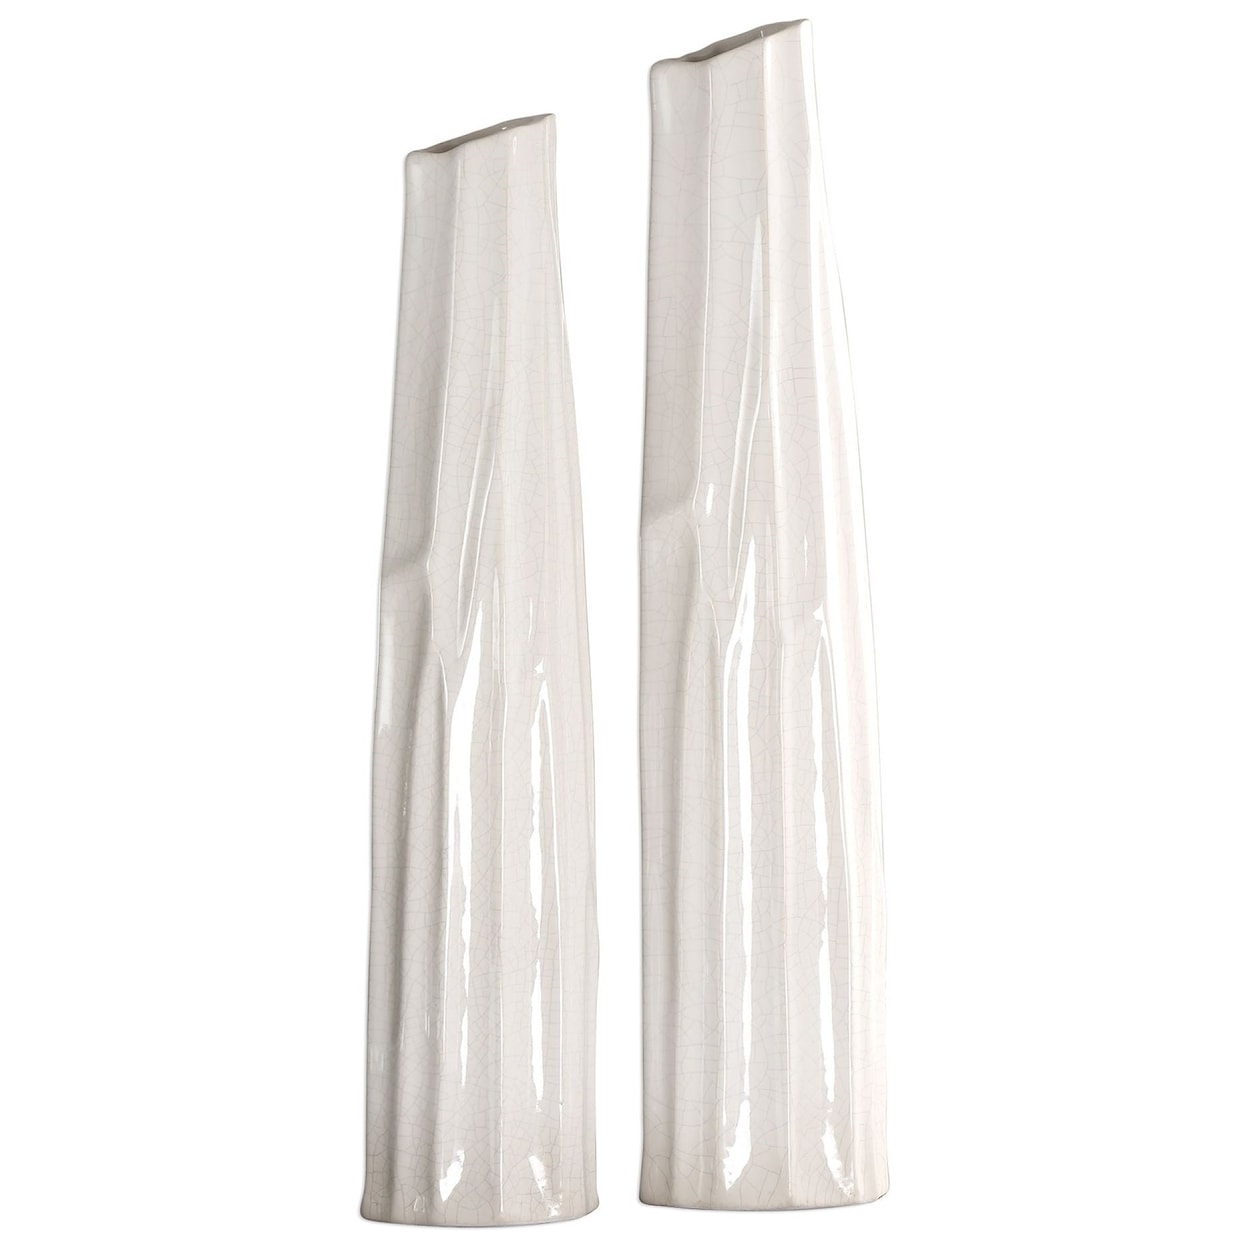 Uttermost Accessories - Vases and Urns Kenley Crackled White Vases S/2